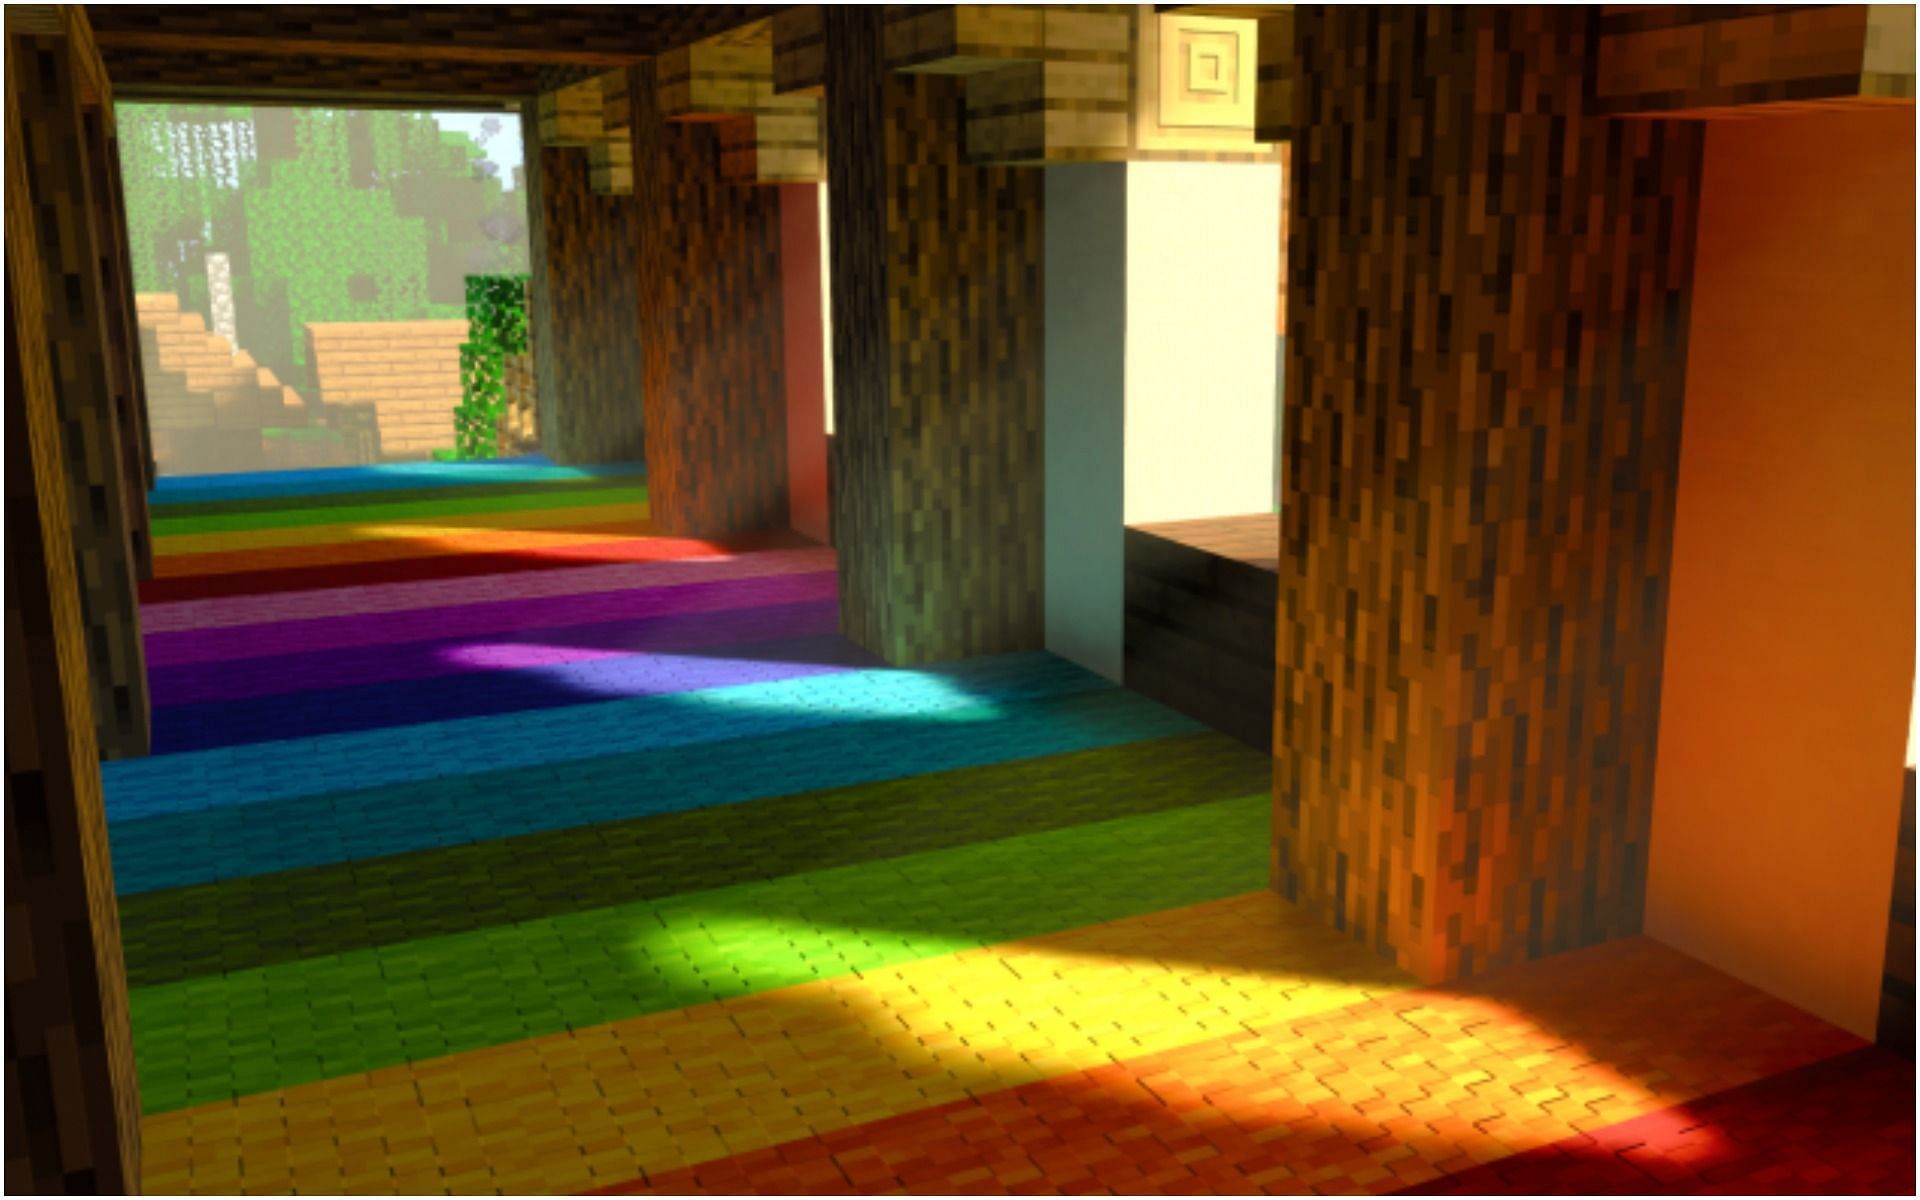 Bedrock Raytracing! Defined PBR shaders working with Minecraft